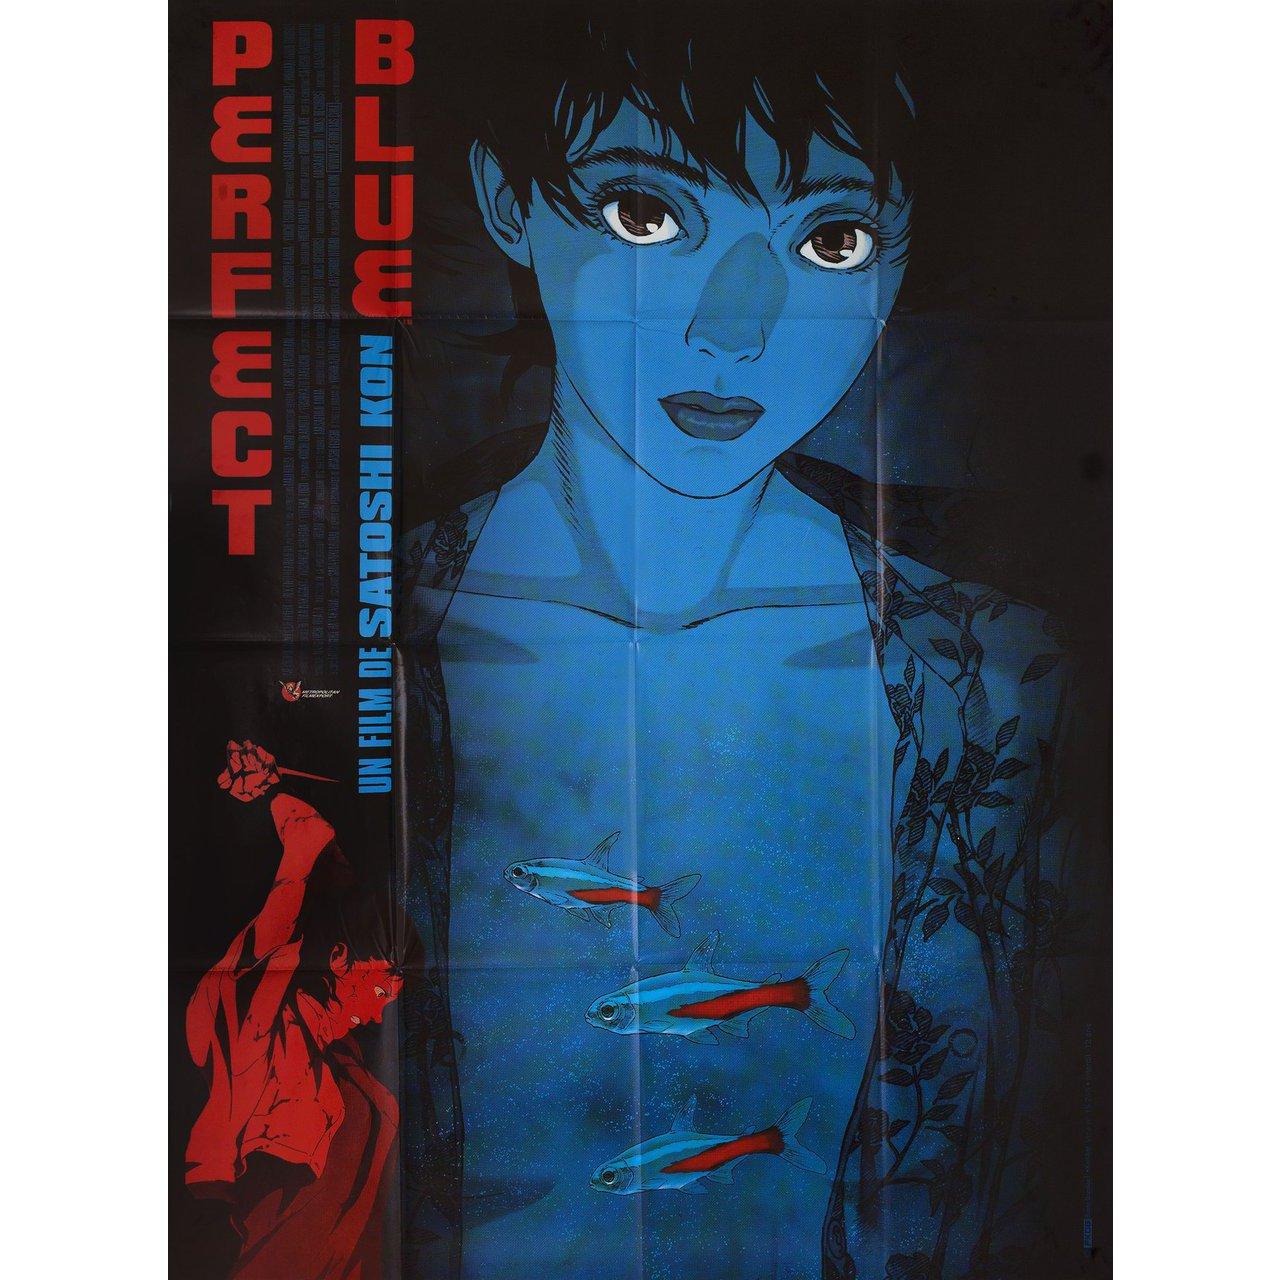 Original 1997 French grande poster for the film Perfect Blue directed by Satoshi Kon with Junko Iwao / Rica Matsumoto / Shinpachi Tsuji / Masaaki Okura. Very Good-Fine condition, folded. Many original posters were issued folded or were subsequently